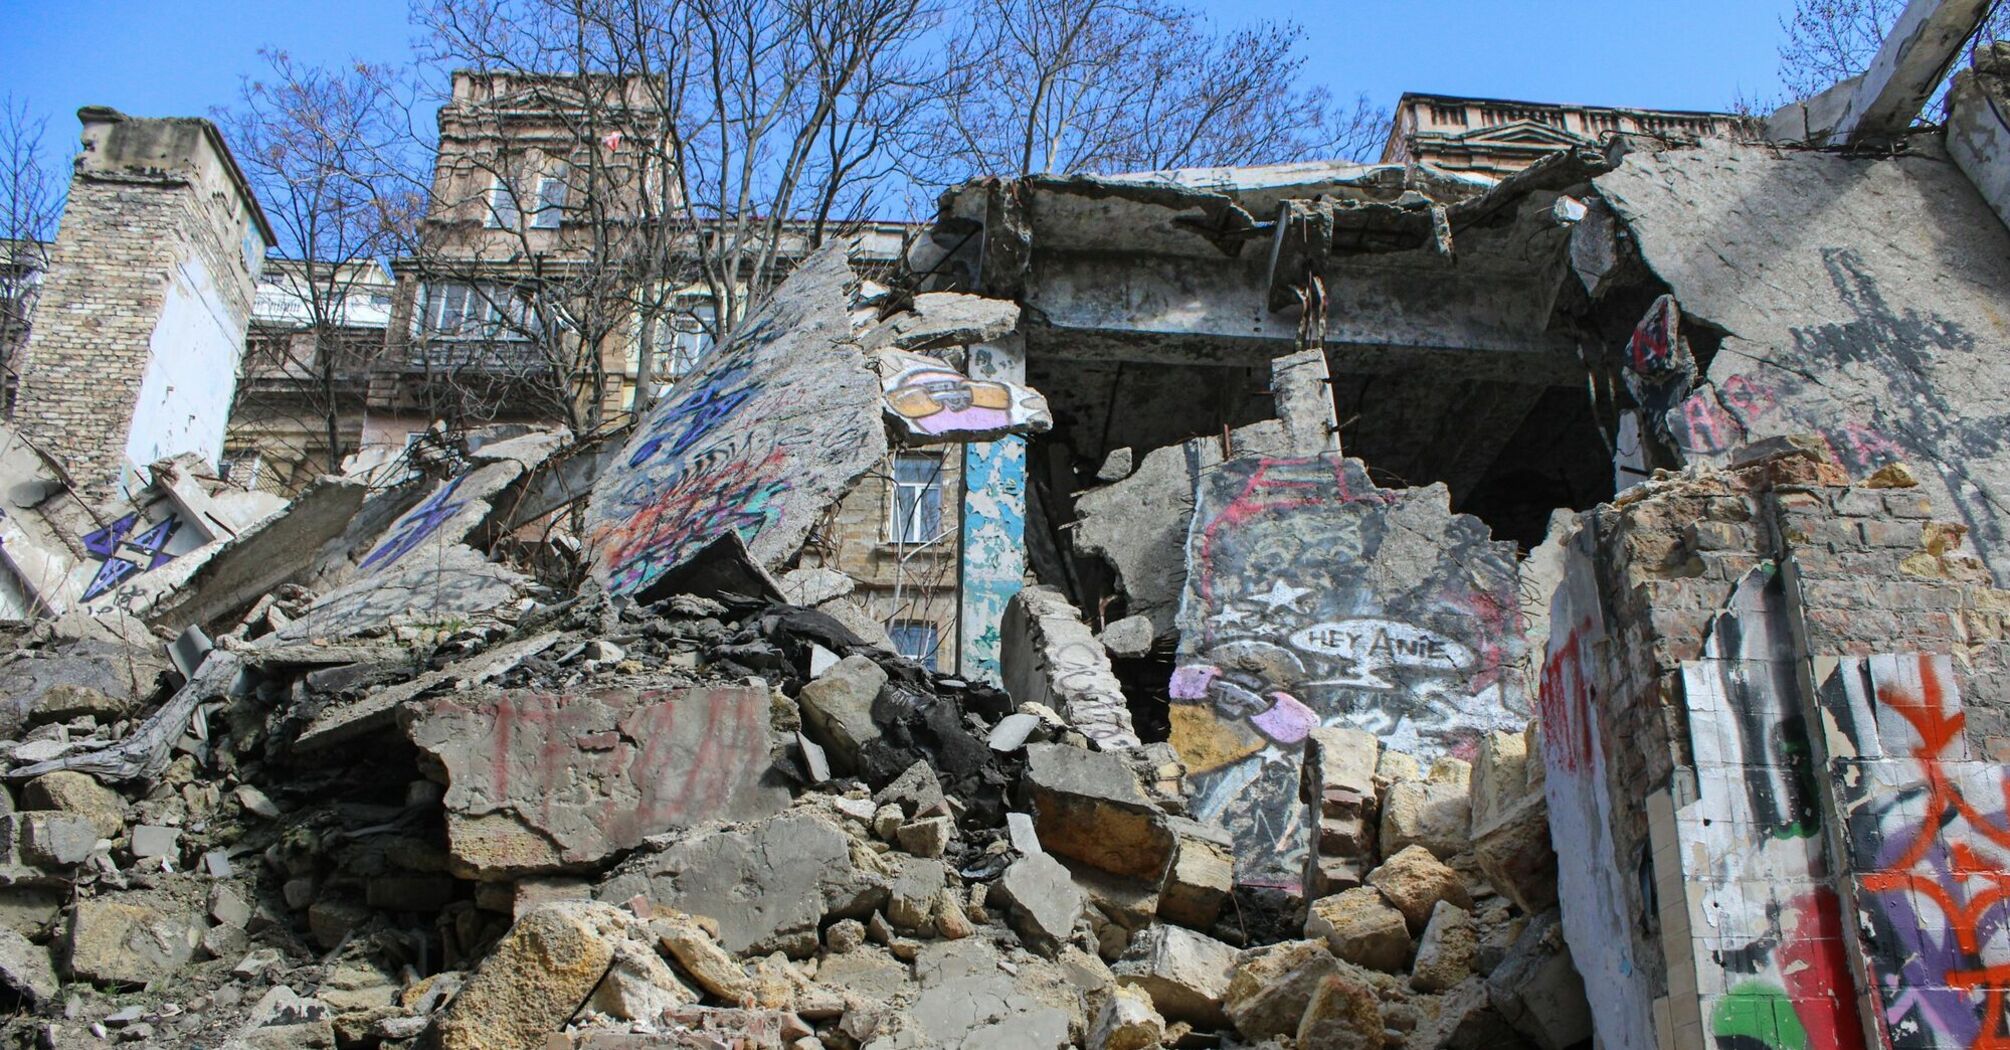 A severely damaged building with collapsed concrete and graffiti